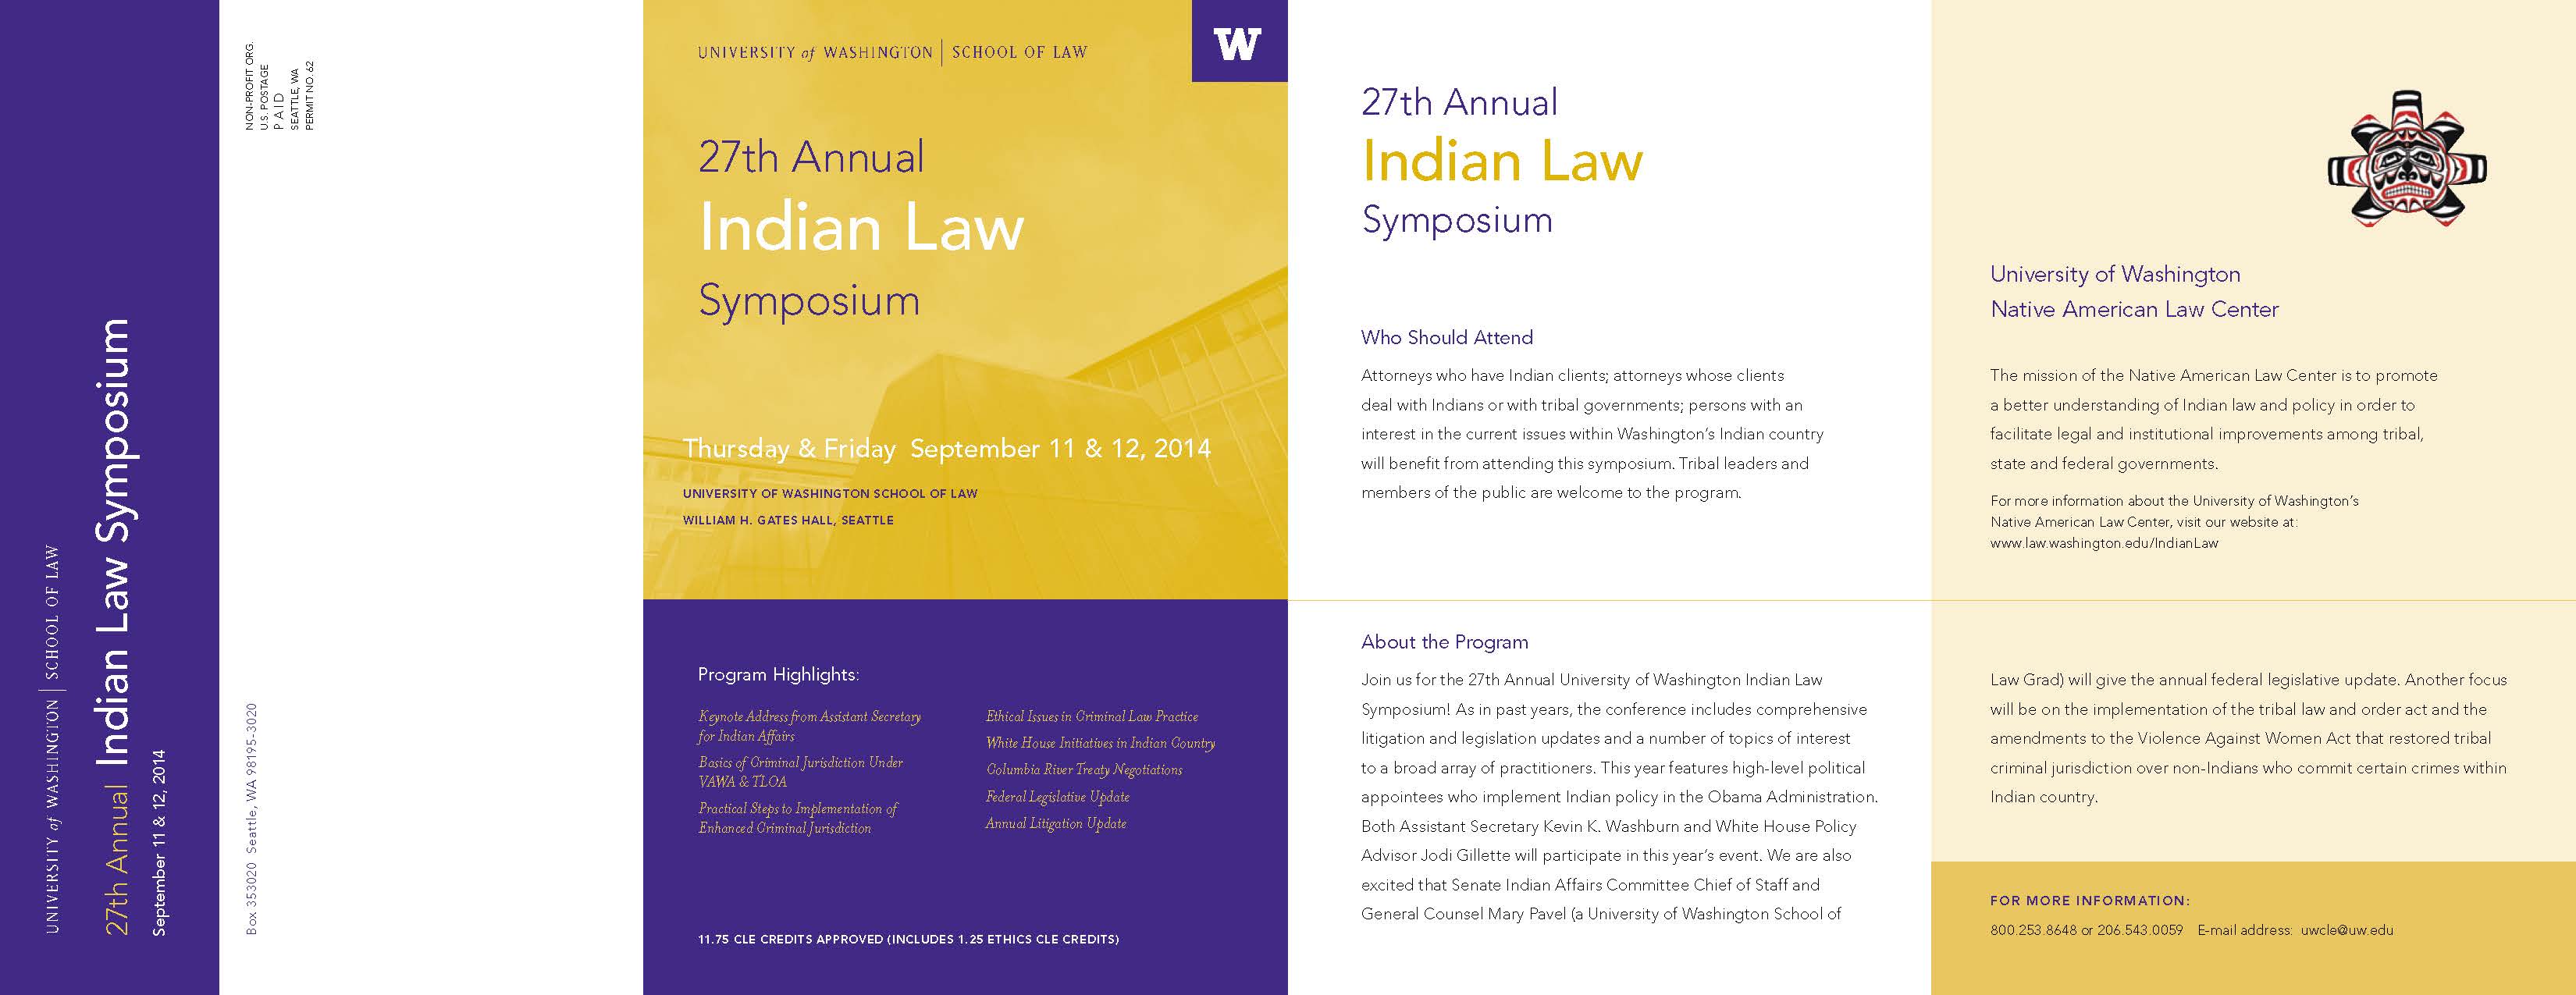 27th Annual Indian Law Symposium Brochure_Page_1